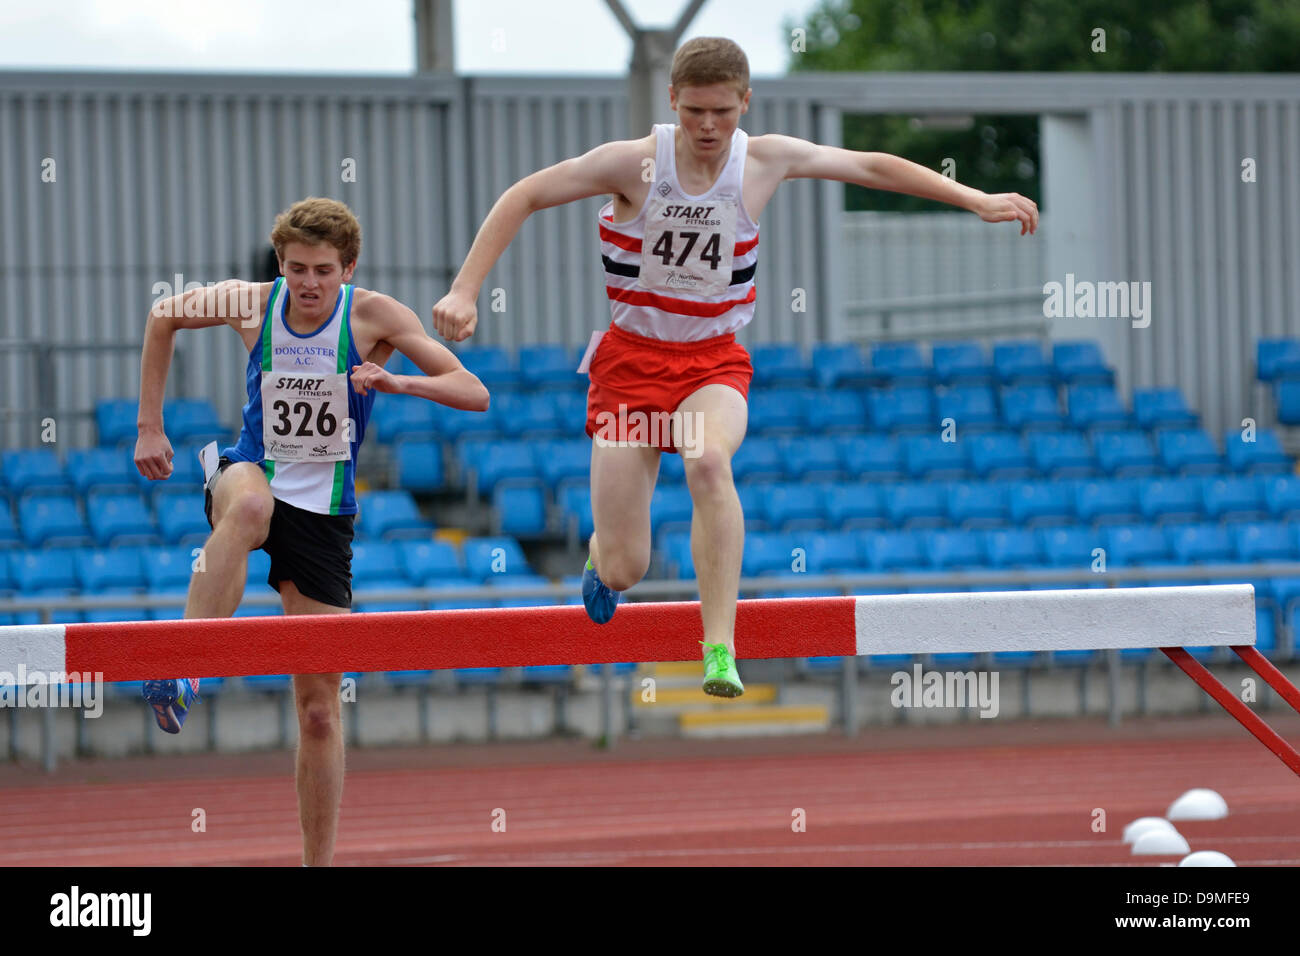 Manchester, UK. 22 June 2013. Northern Athletics Championships  Sportcity  Manchester, UK  22 June 2013 Bertie Houghton (326 Doncaster AC) on his way to winning the U20 2000m Steeplechase in 6.02.64. Haran Dunderdale (474 Lincoln Wellington) comes second in 6.10.38 Credit:  John Fryer/Alamy Live News Stock Photo